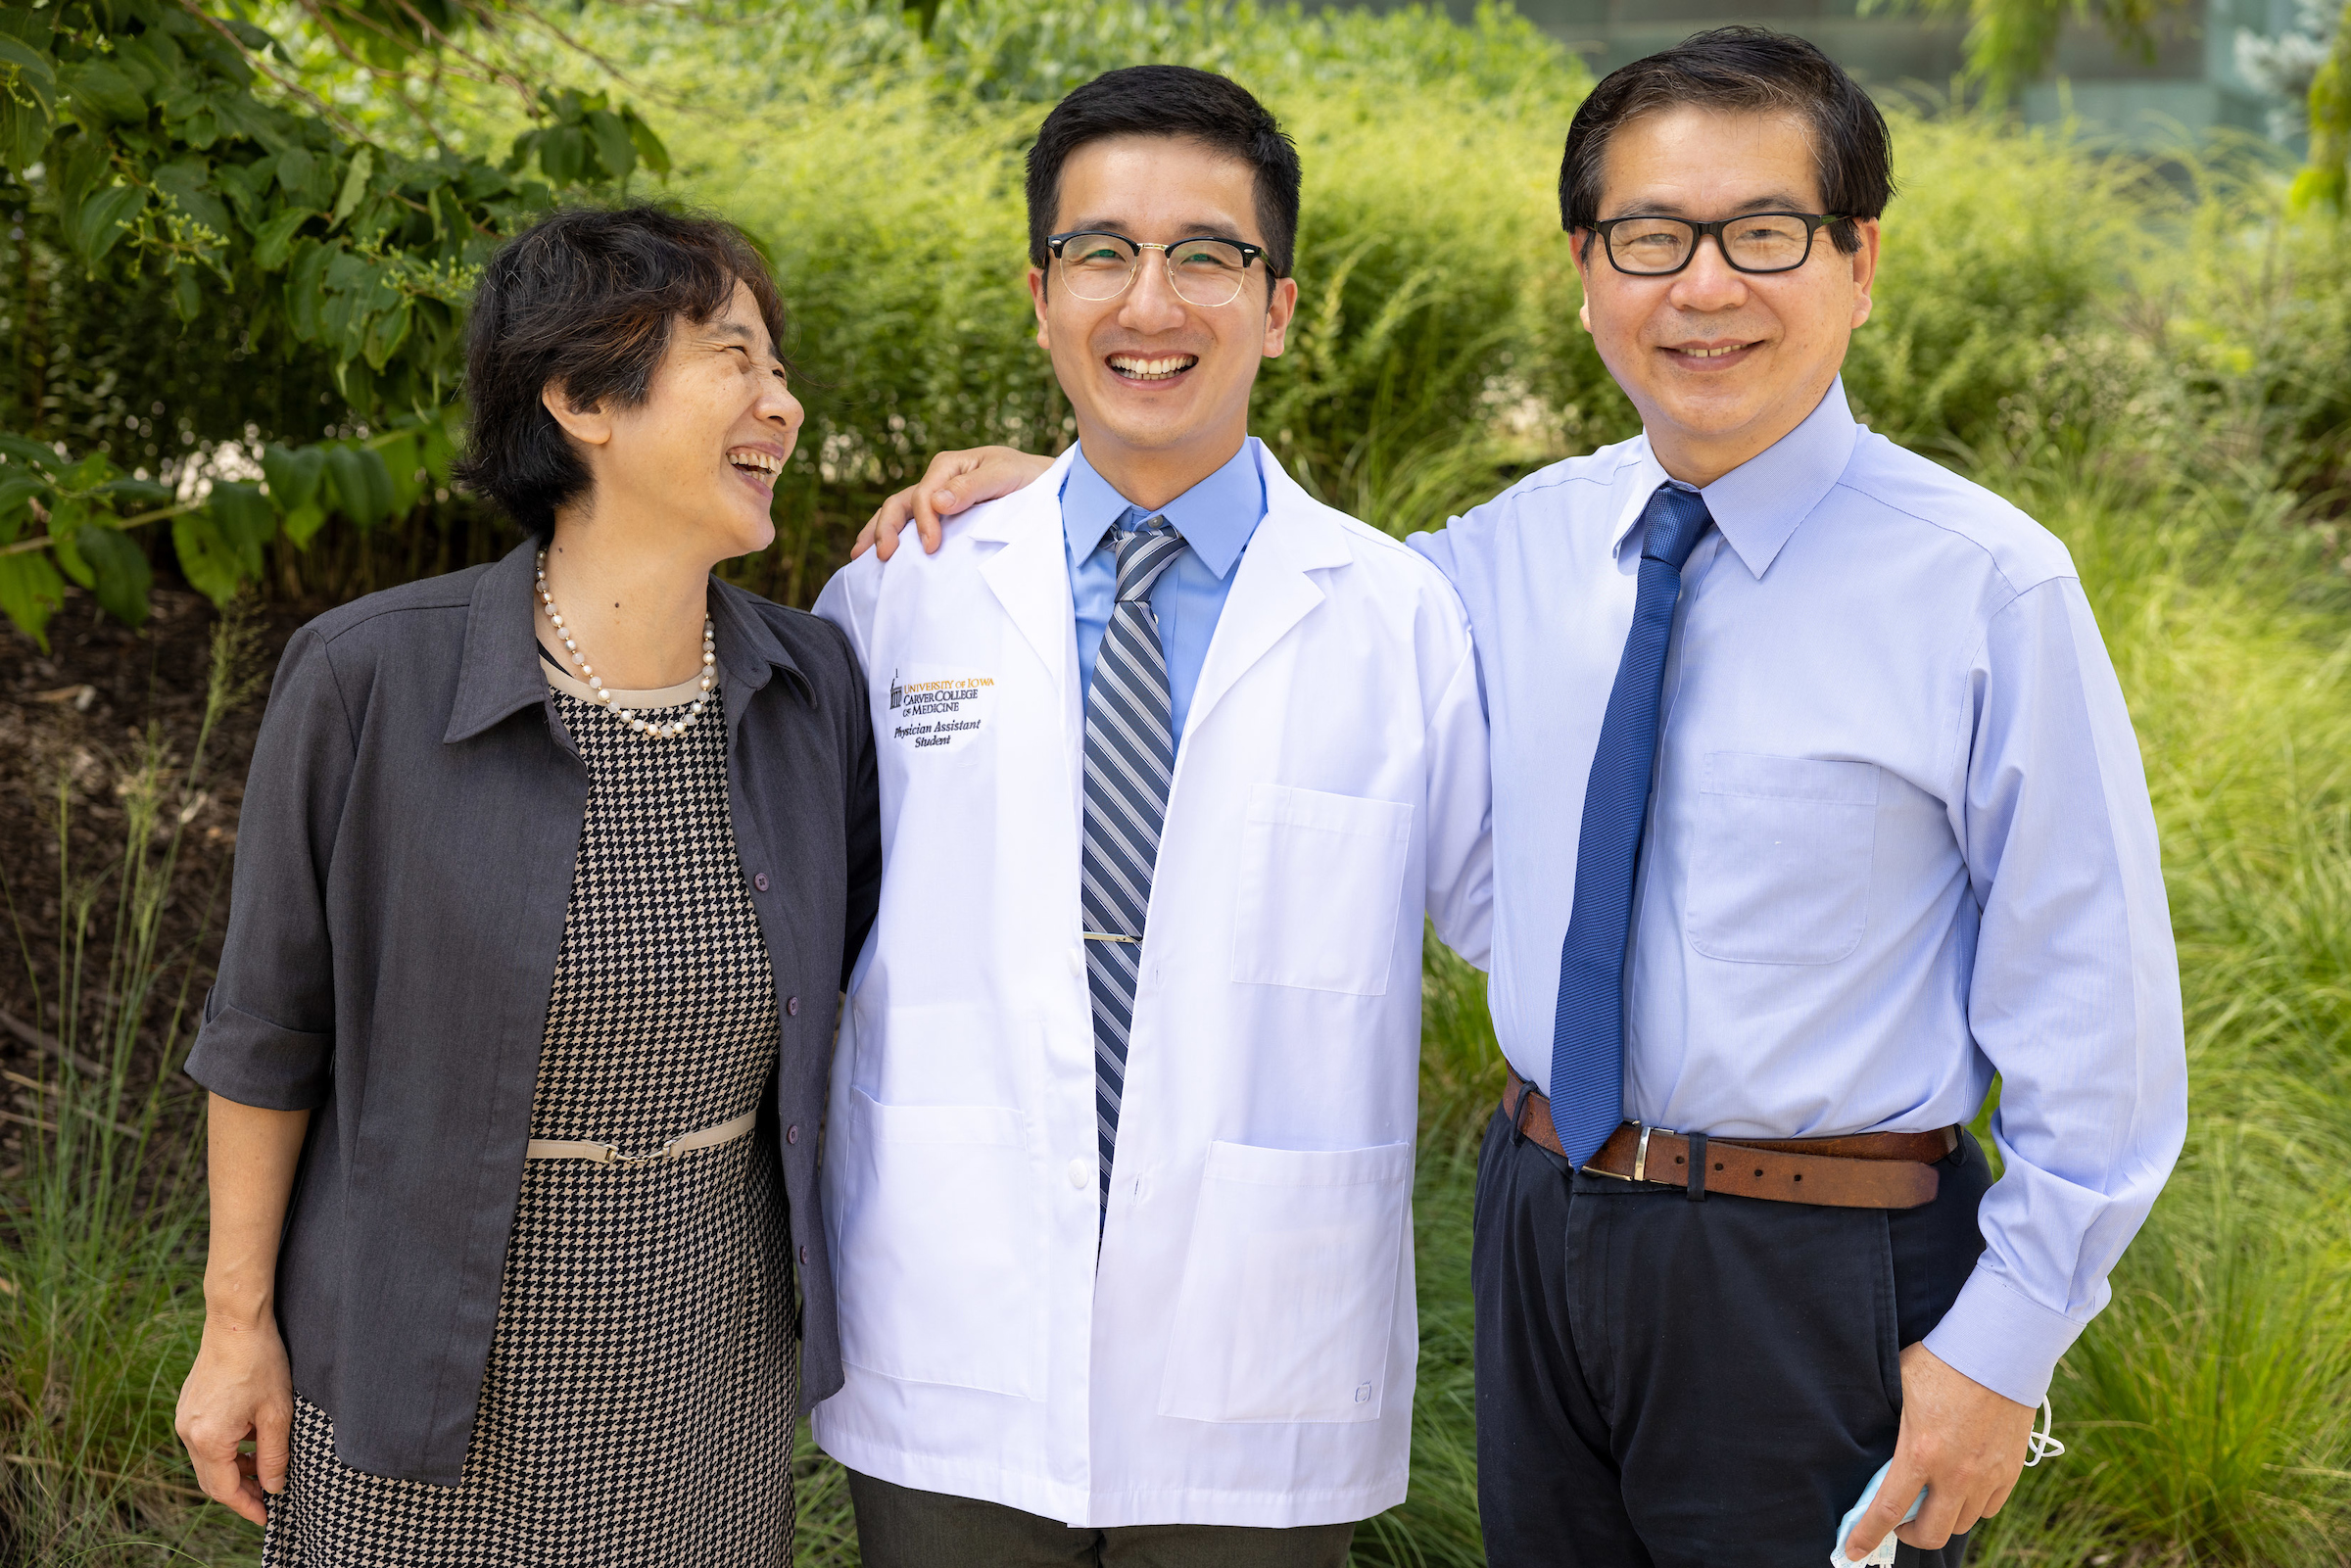 Student George Li stands between his parents, Chunxin Wang and Zhenbo (James) Li, at the at the UI PA Program White Coat Ceremony on August 5, 2022.